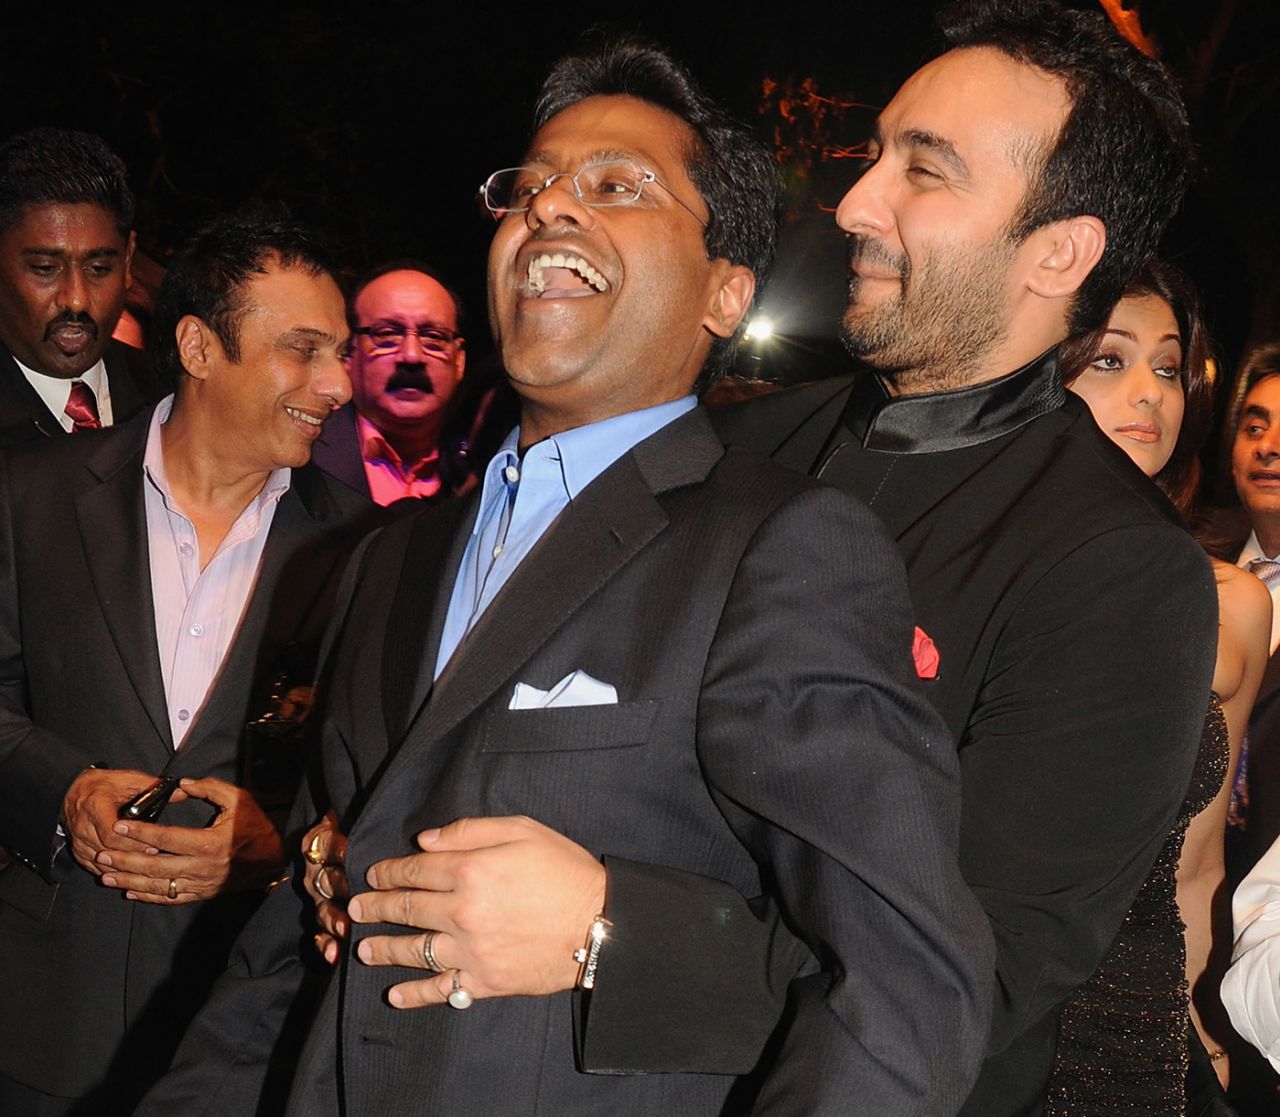 Lalit Modi and Raj Kundra at the IPL opening party in Mumbai, March 11, 2010